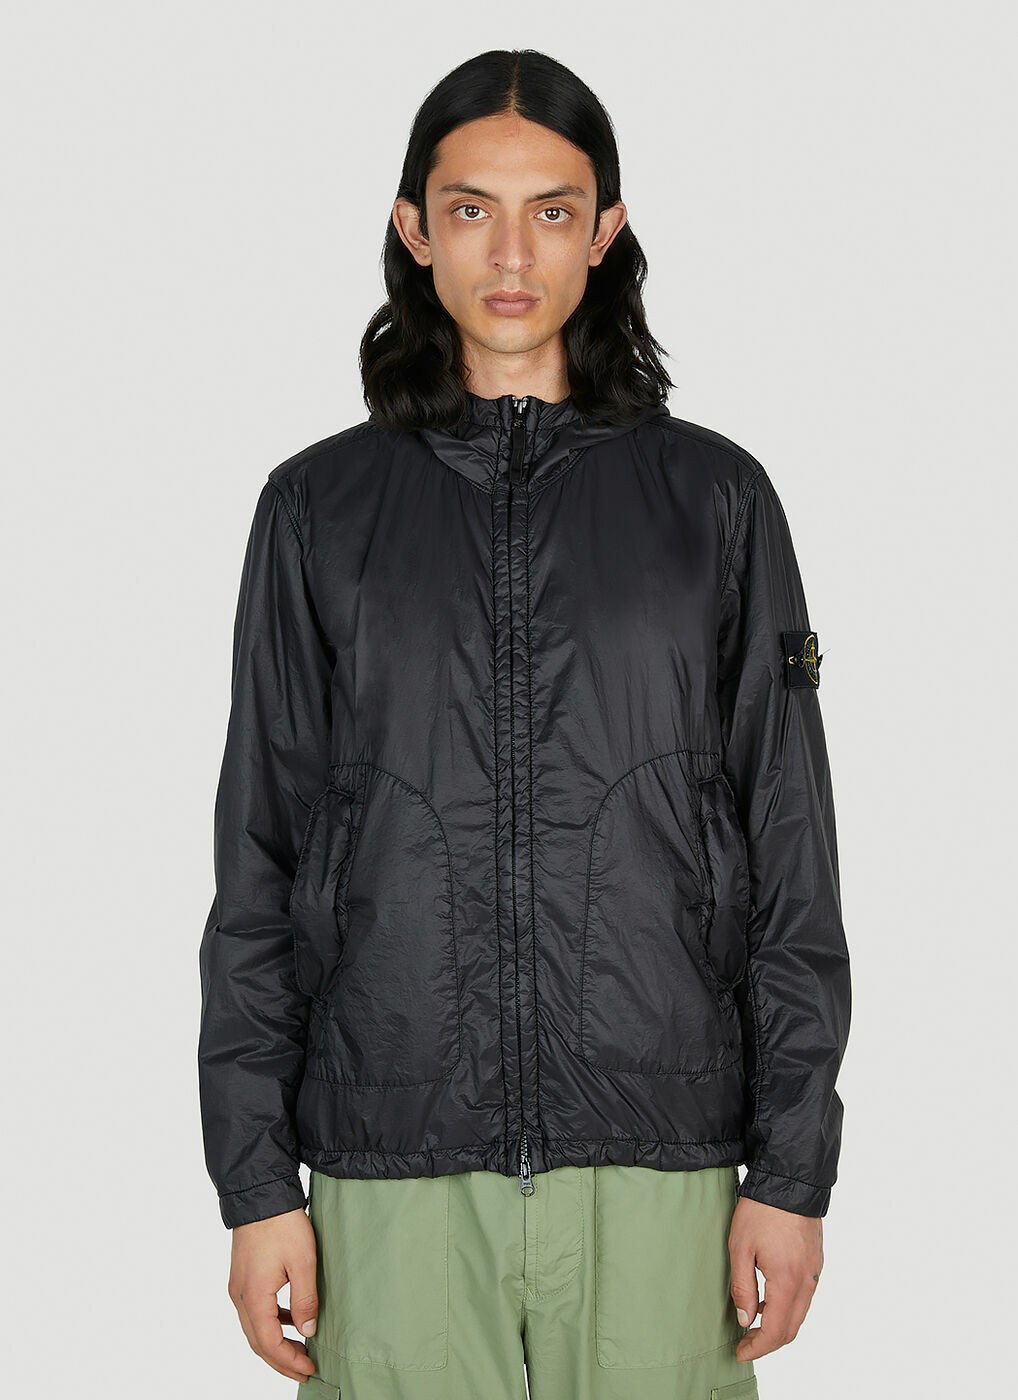 Stone Island - Packable Compass Patch Jacket in Black Stone Island